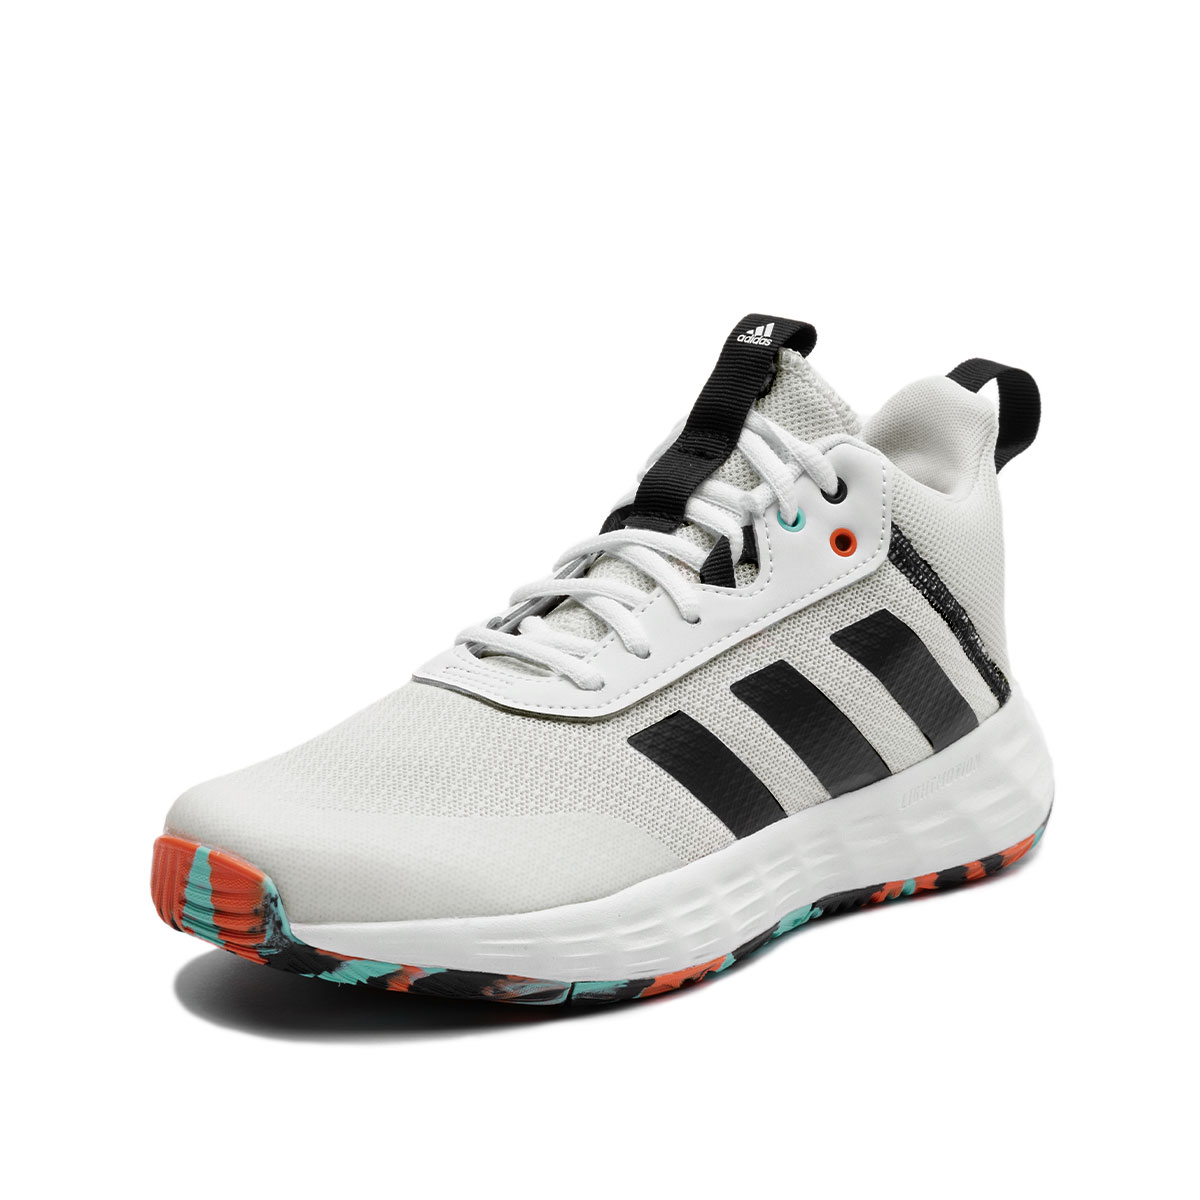 adidas Ownthegame 2.0  H01556